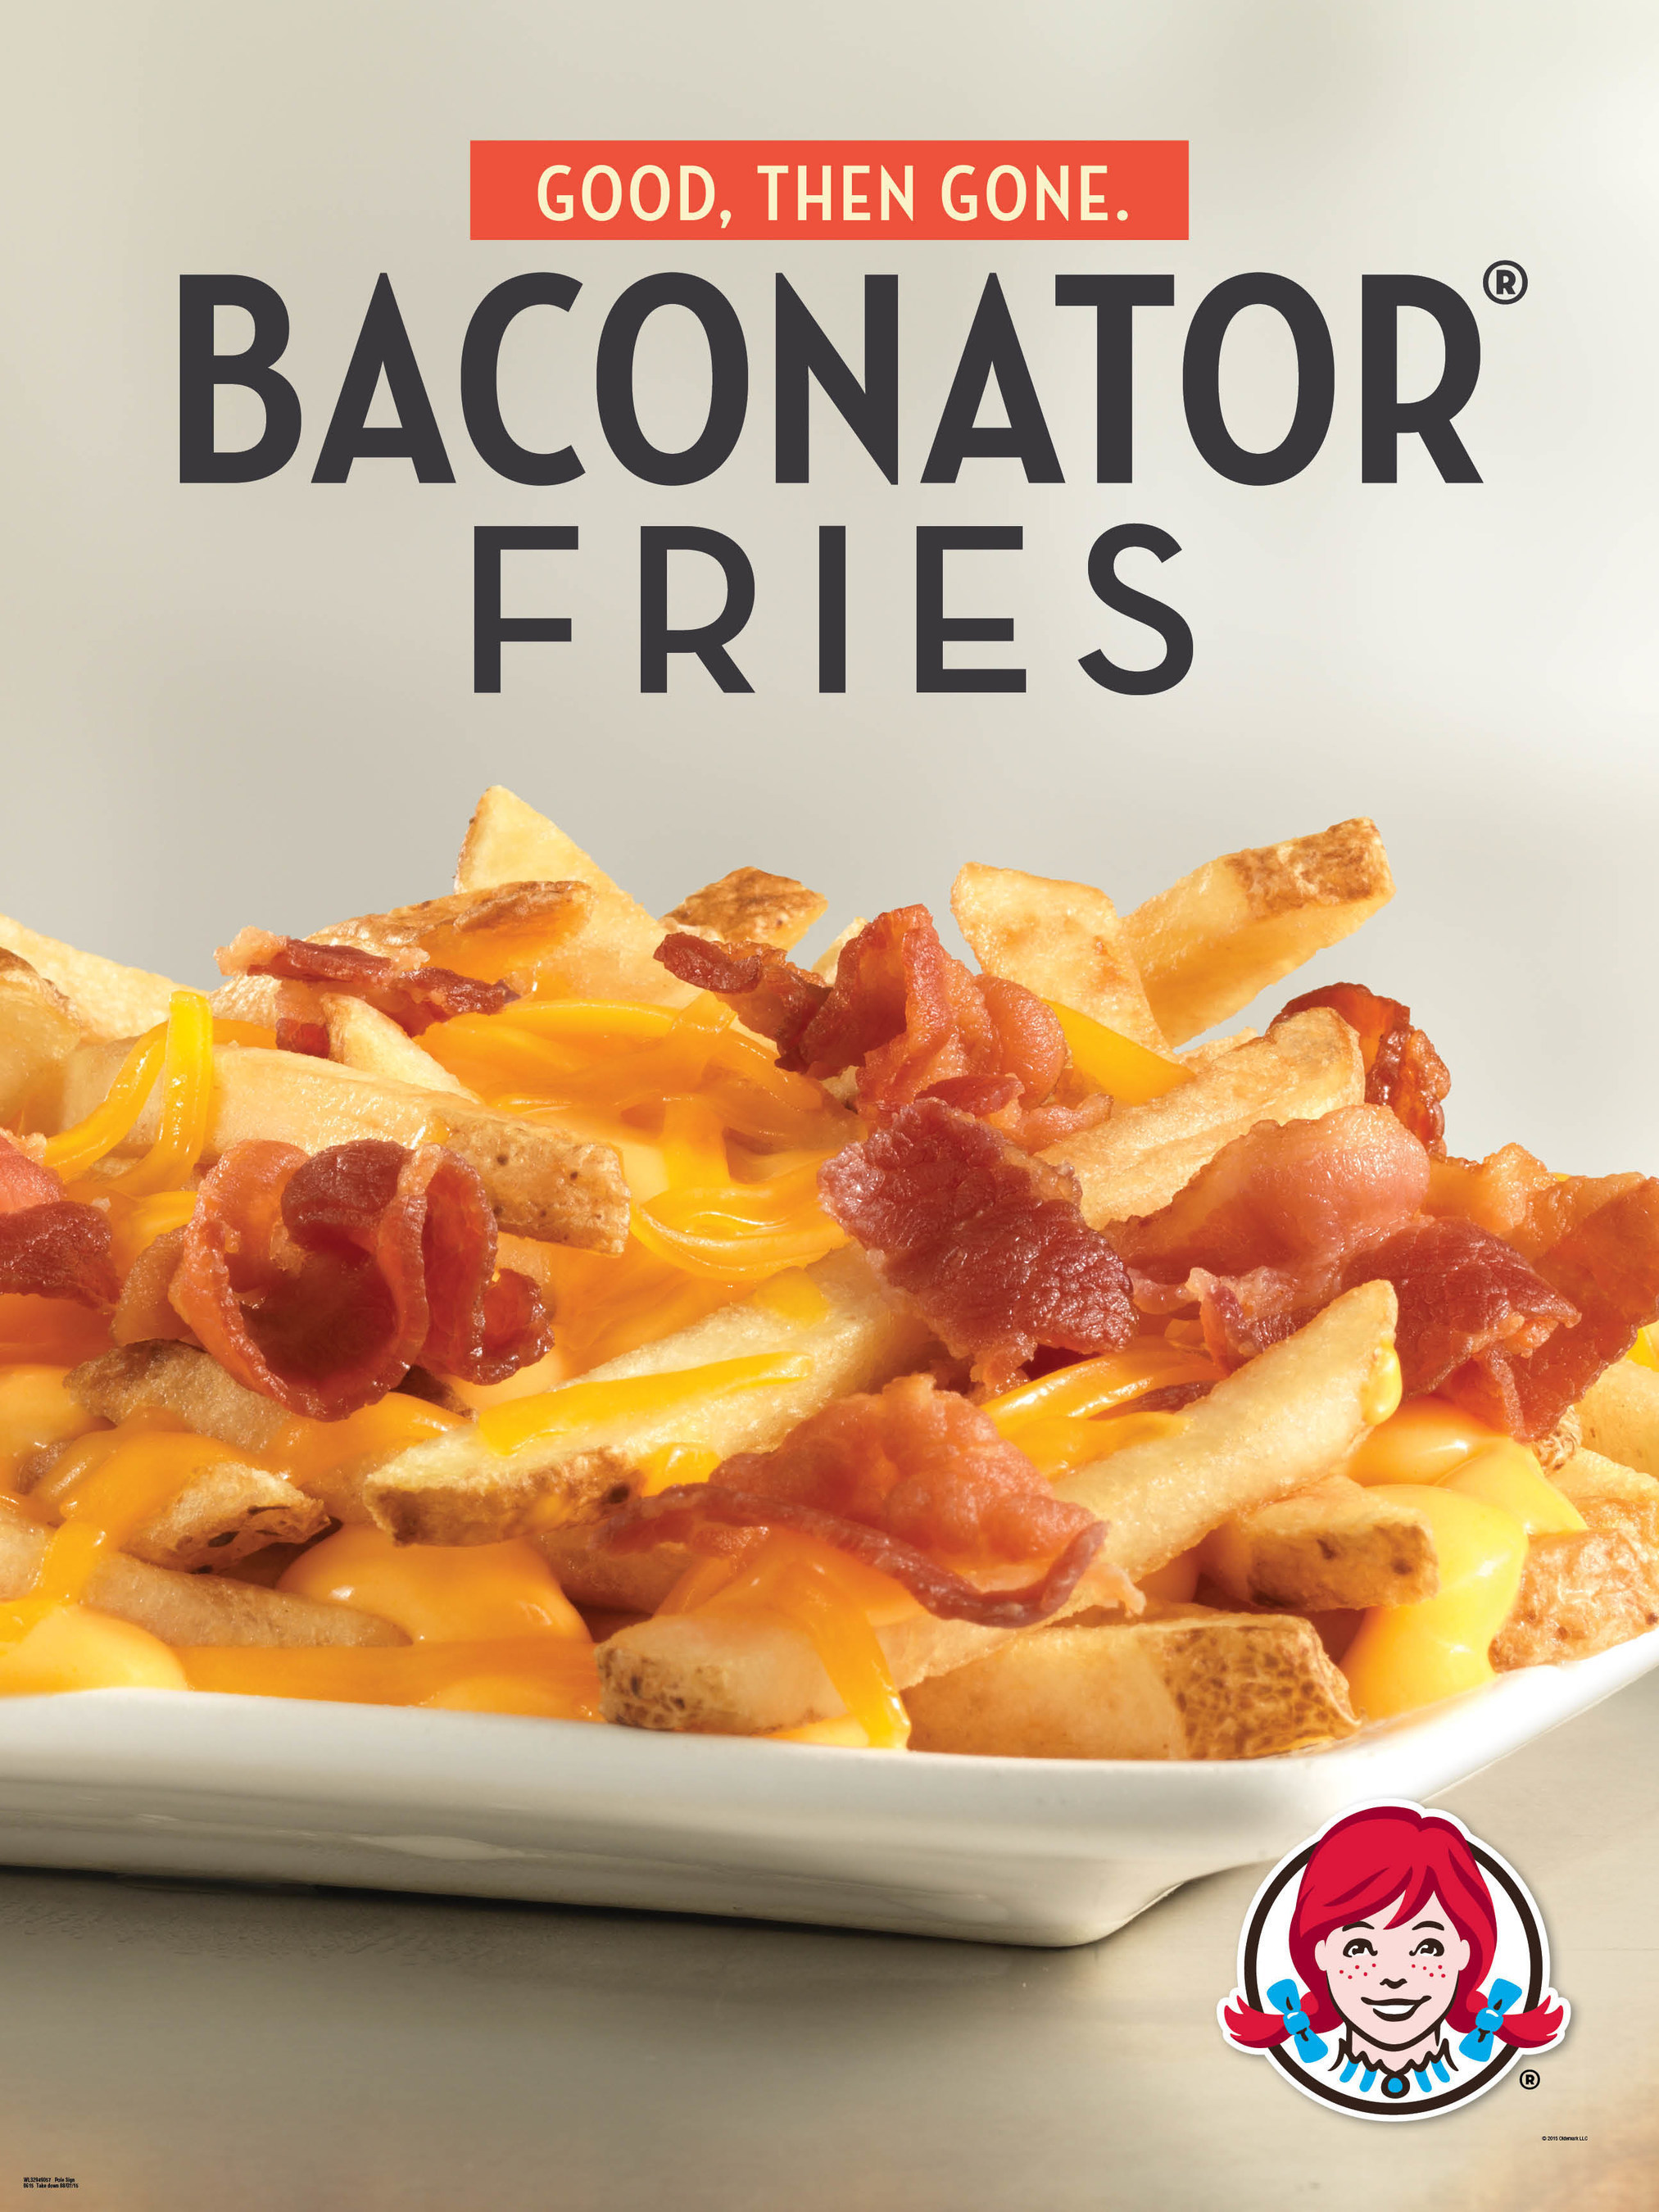 The Baconator and the new, limited-time Baconator Fries are the real deal. Made with real Applewood Smoked Bacon and cooked in-restaurant every day, these offerings represent Wendy's longstanding commitment to quality ingredients and fresh preparation. The new Baconator Fries load fresh-cooked bacon with warm cheddar cheese sauce and shredded cheddar cheese over Wendy's natural-cut fries. Wendy's famous Baconator combines six strips of bacon with two quarter pound, 100 percent, all-natural beef patties...